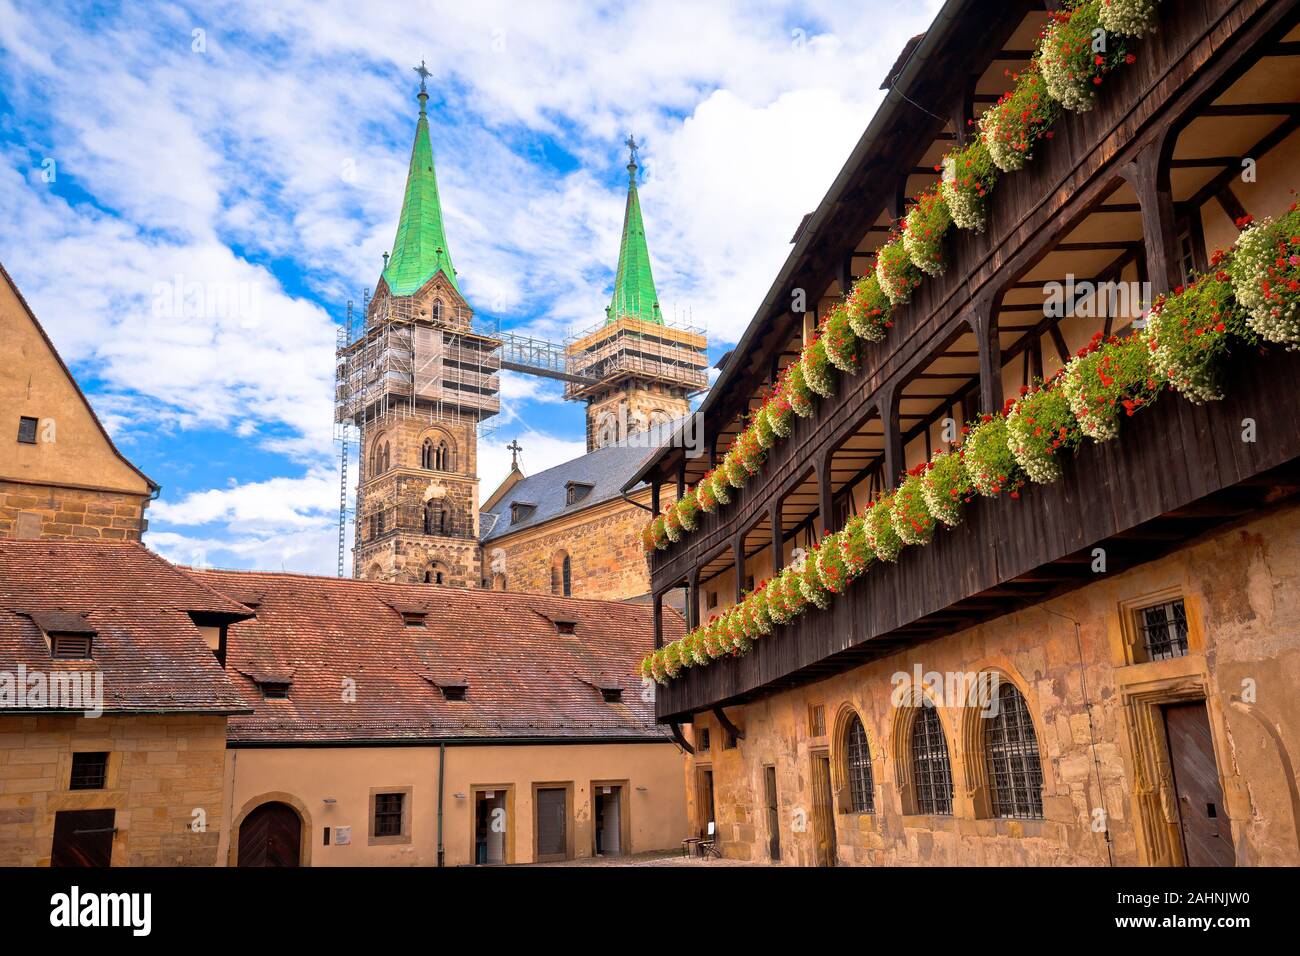 Bamberger Dom or Bamberg cathedral towers and streets of old town view, Bavaria region of Germany Stock Photo